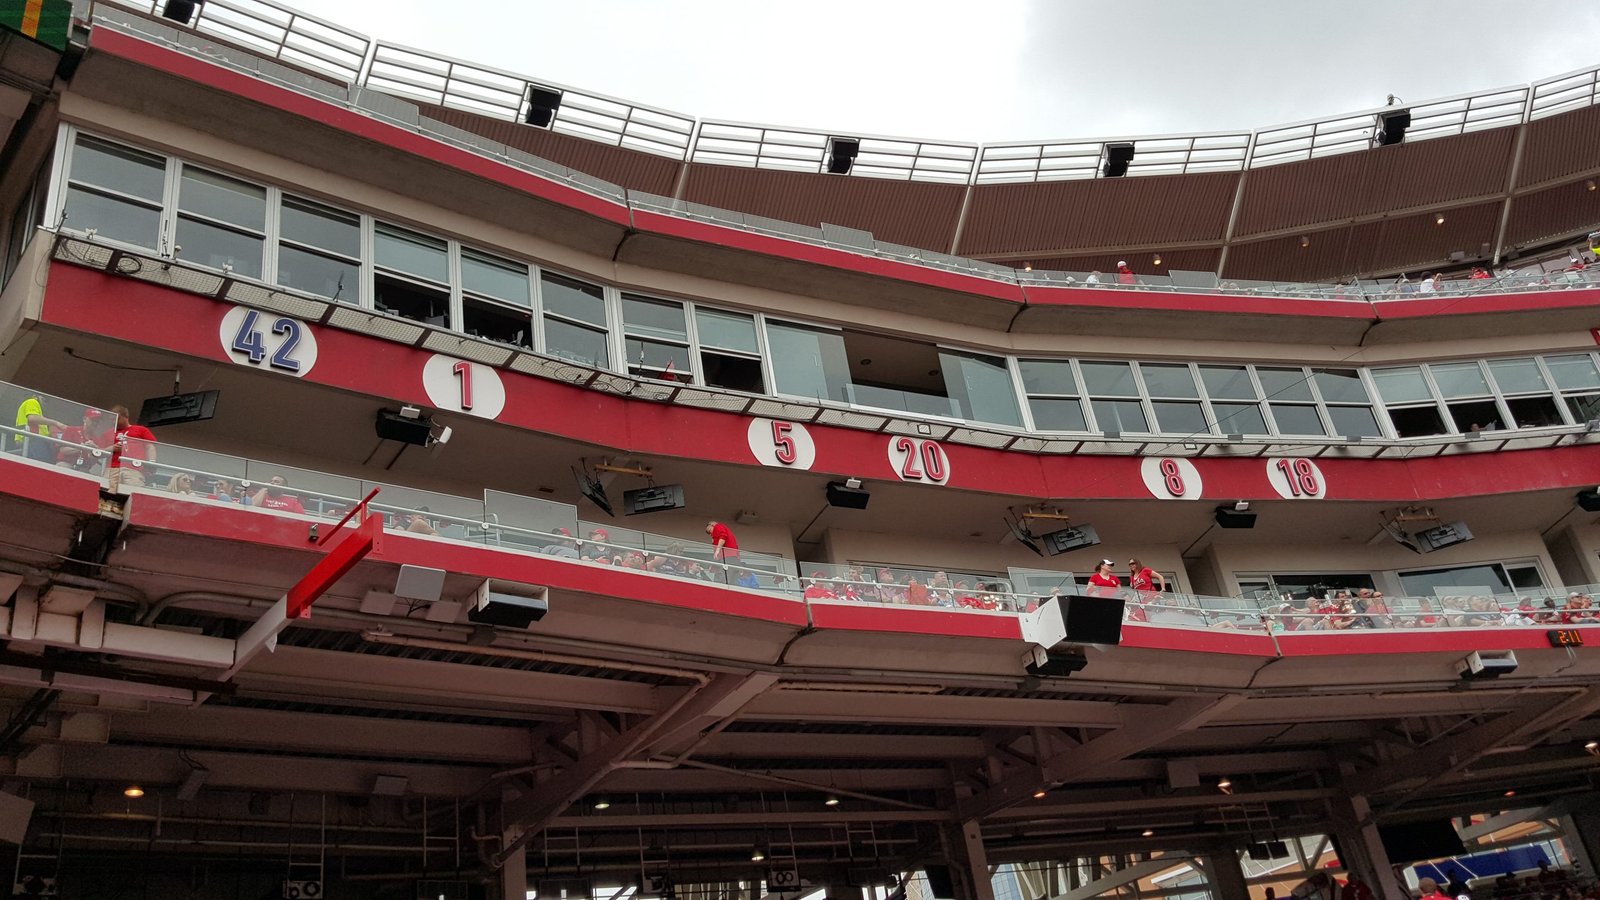 Great American Ball Park Reviews